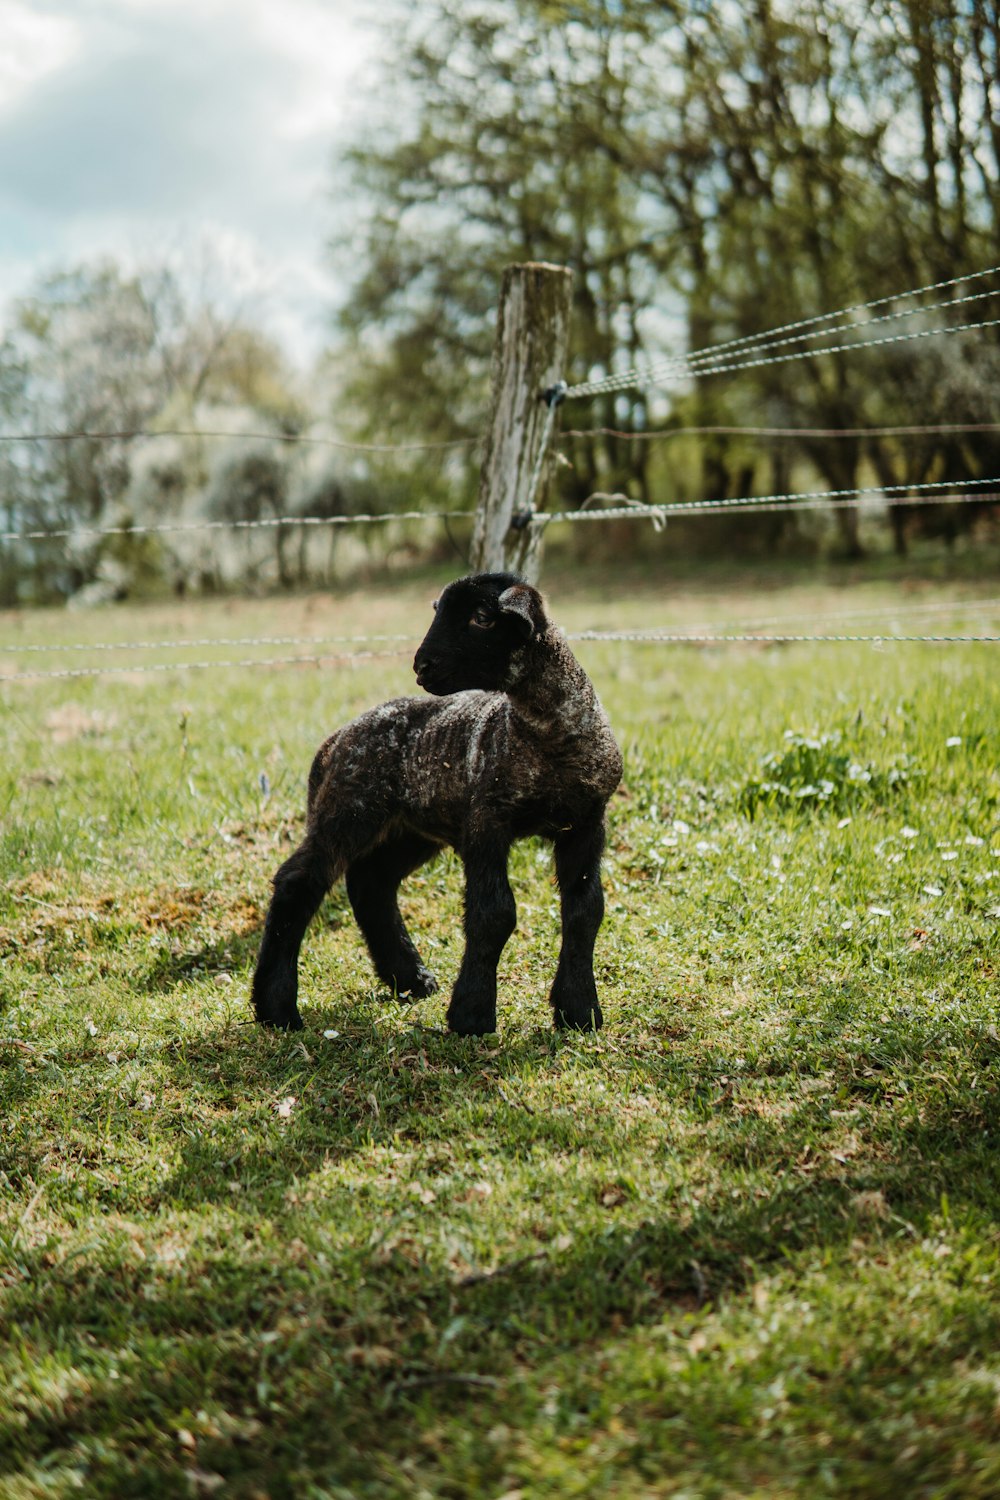 a baby lamb standing next to a fence